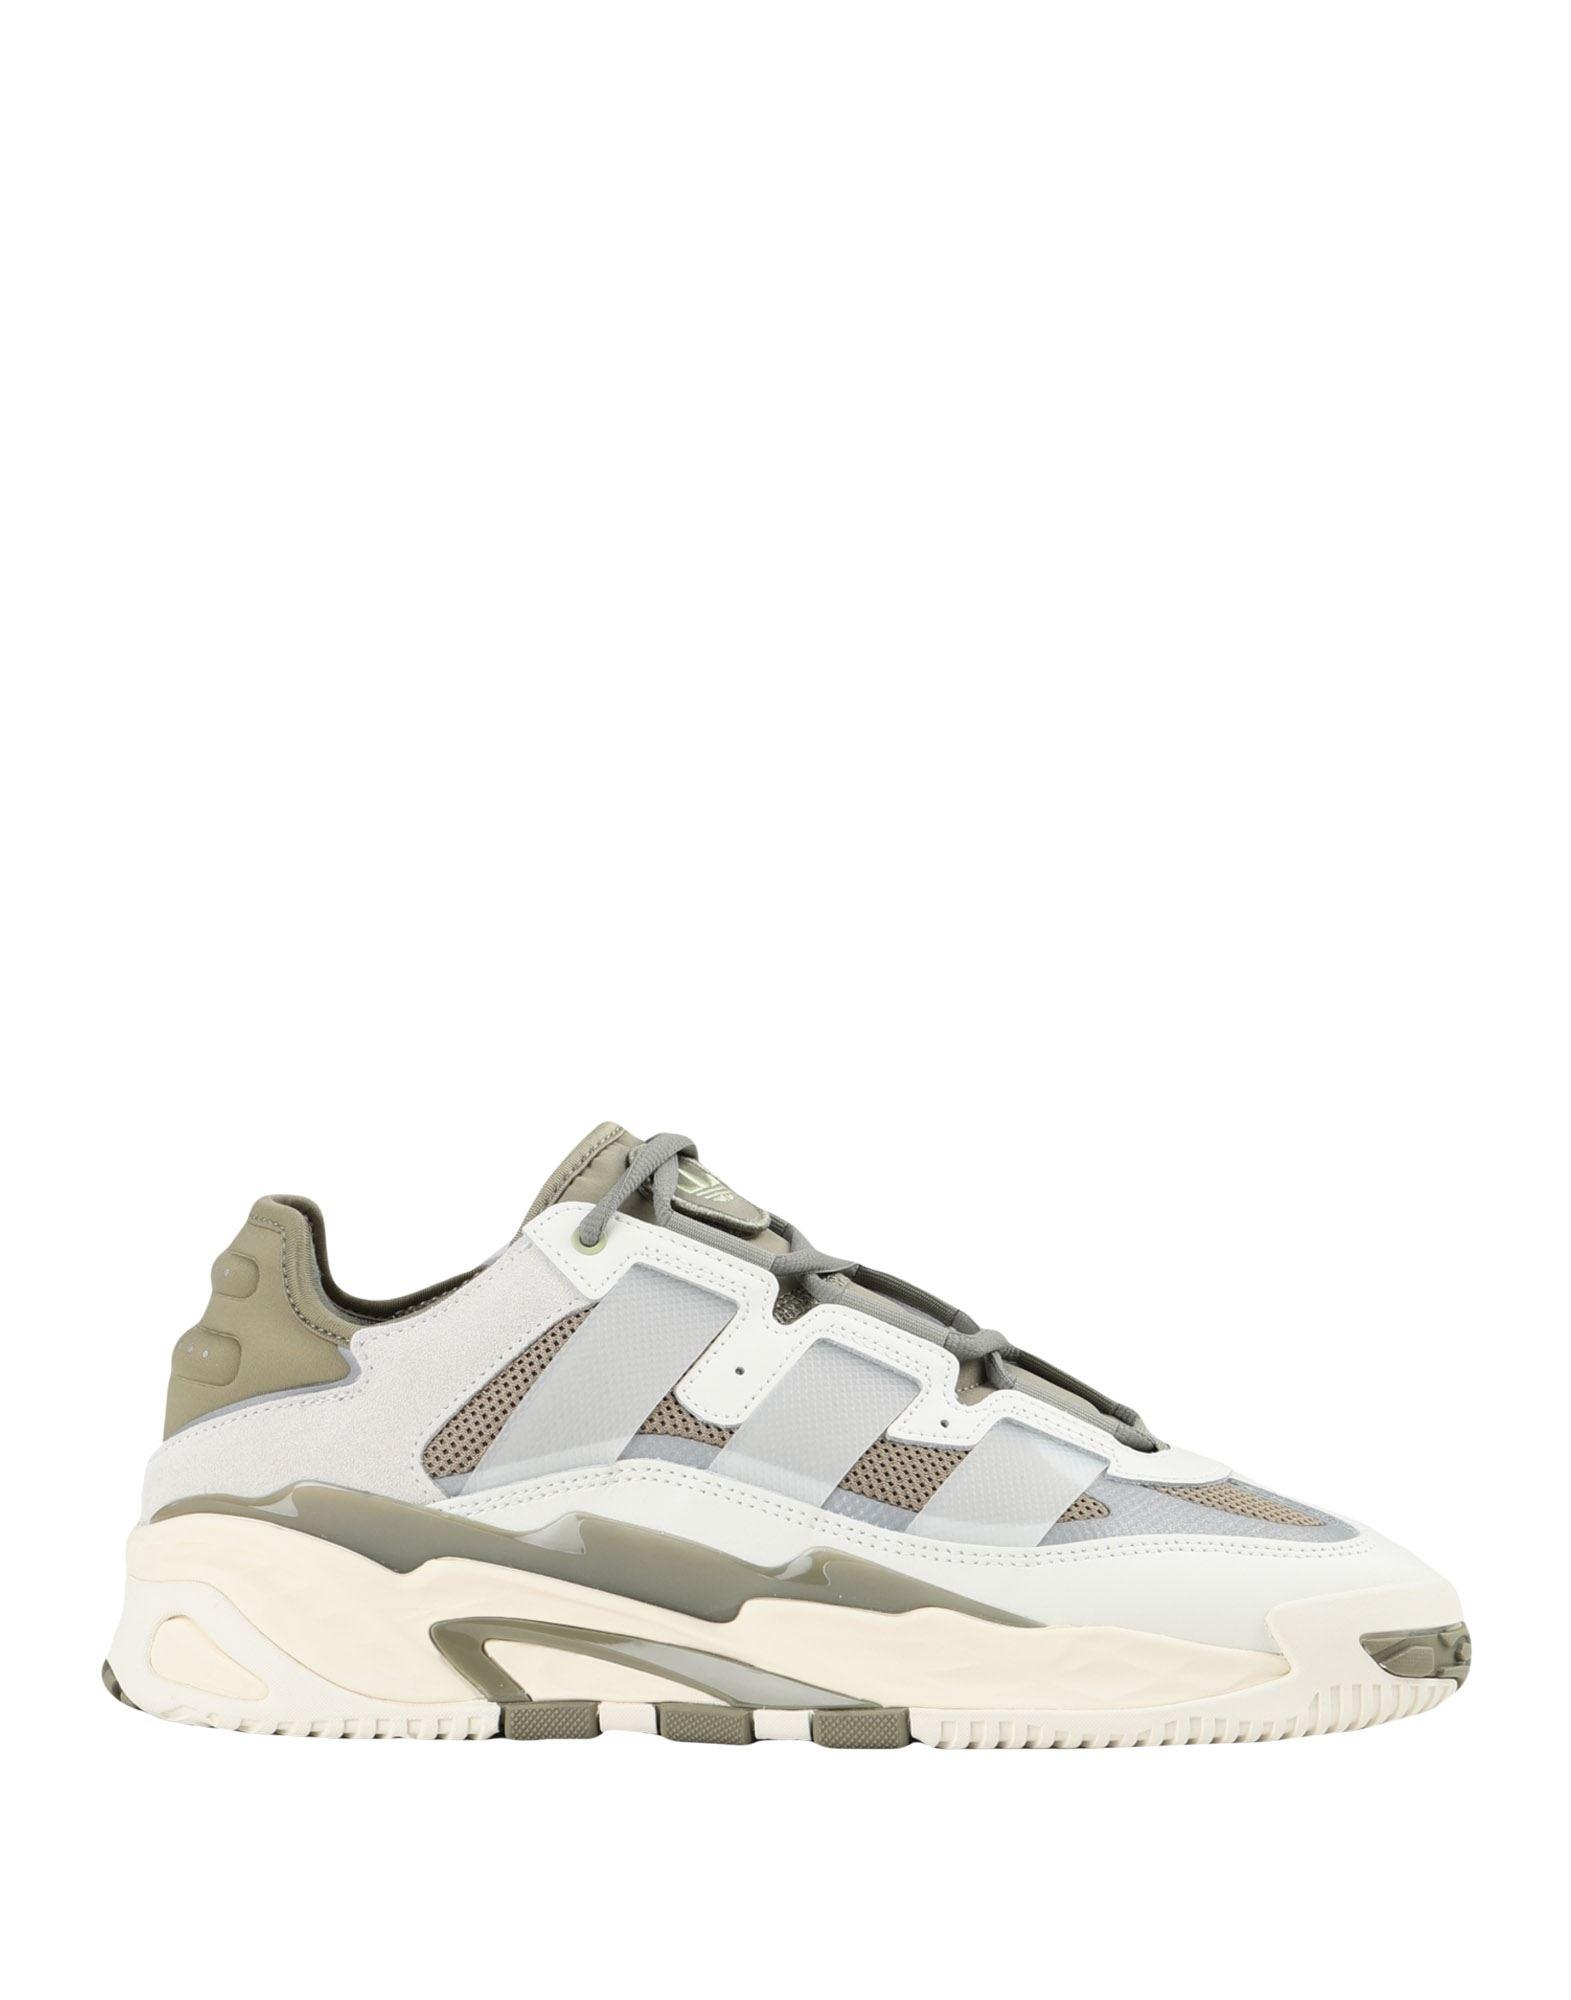 adidas Originals Rubber Trainers in Military Green (White) for Men - Lyst